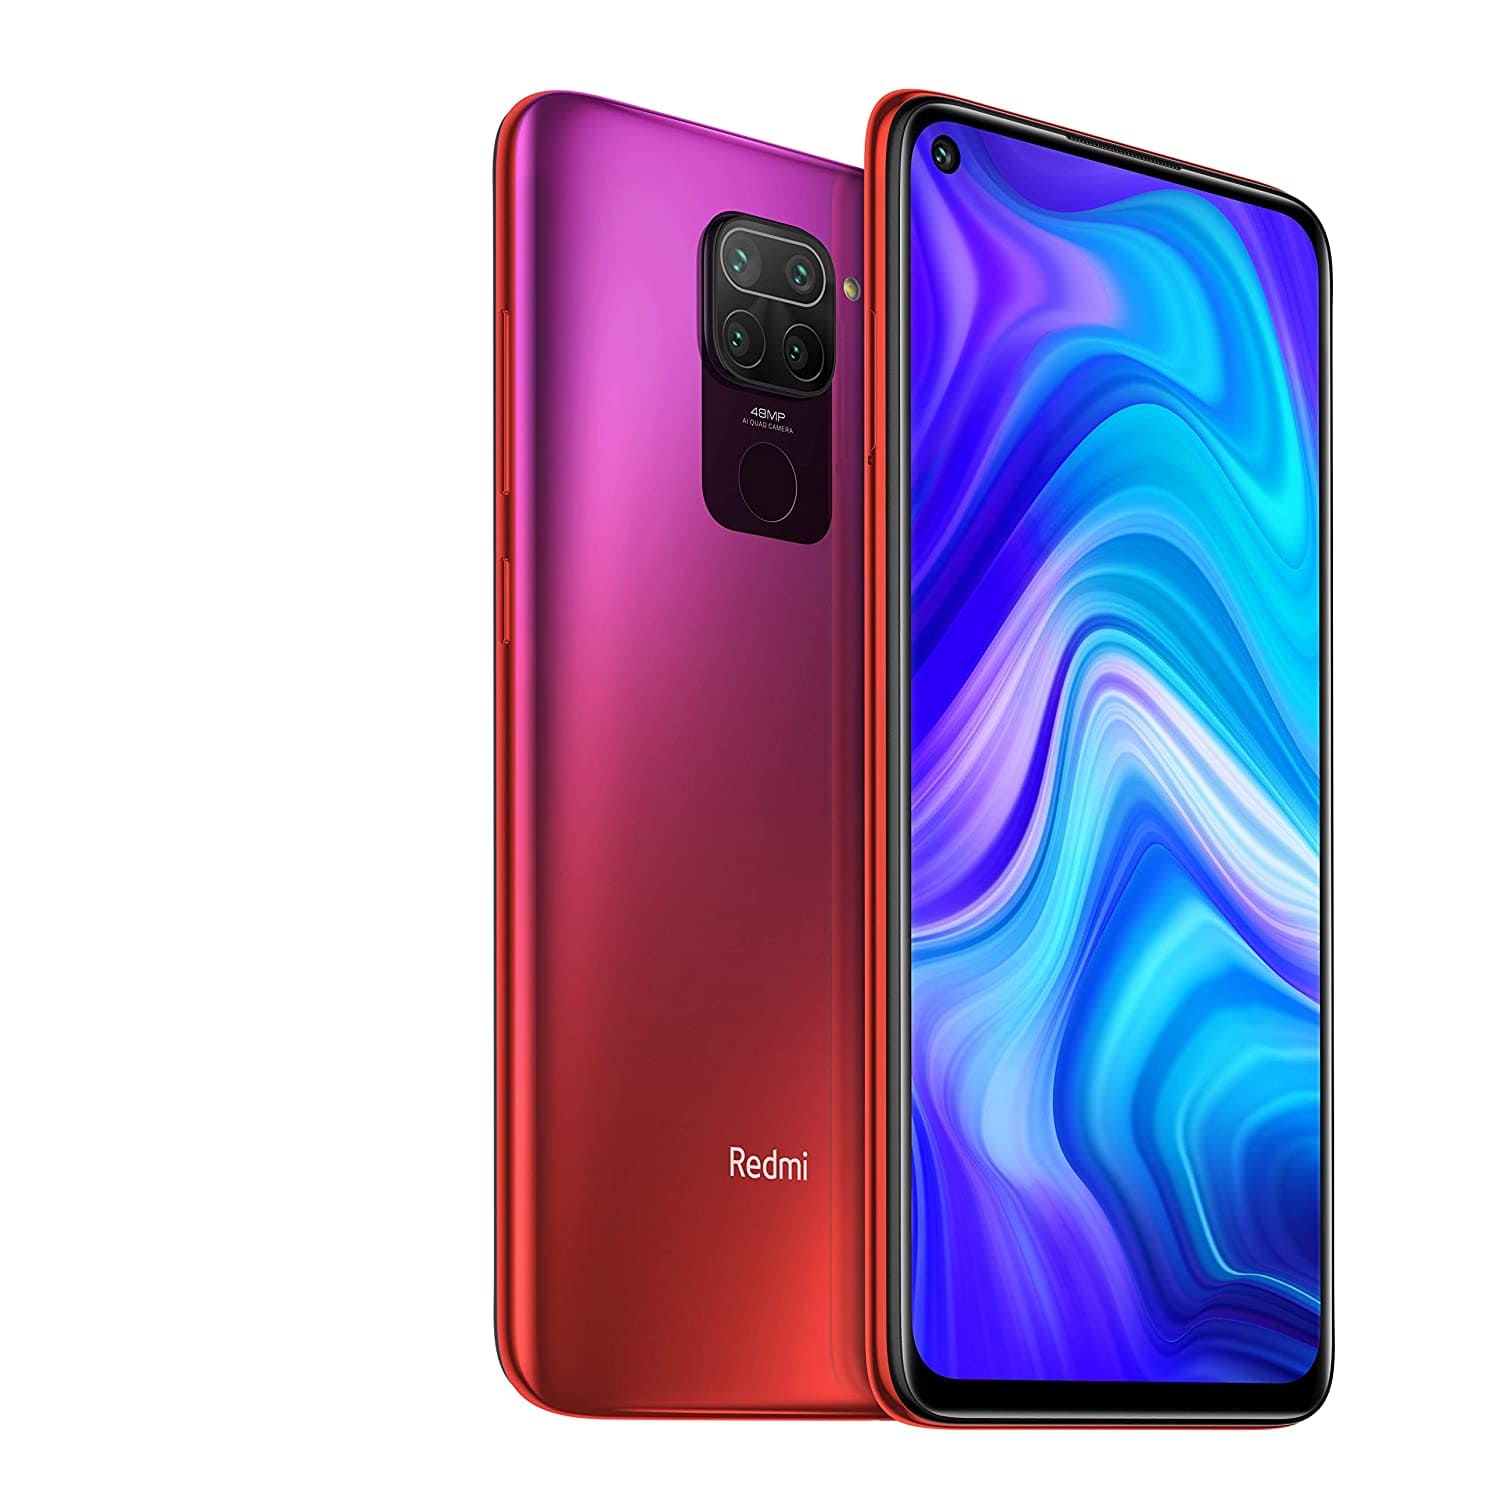 Redmi note 9 is the best mobile in the market